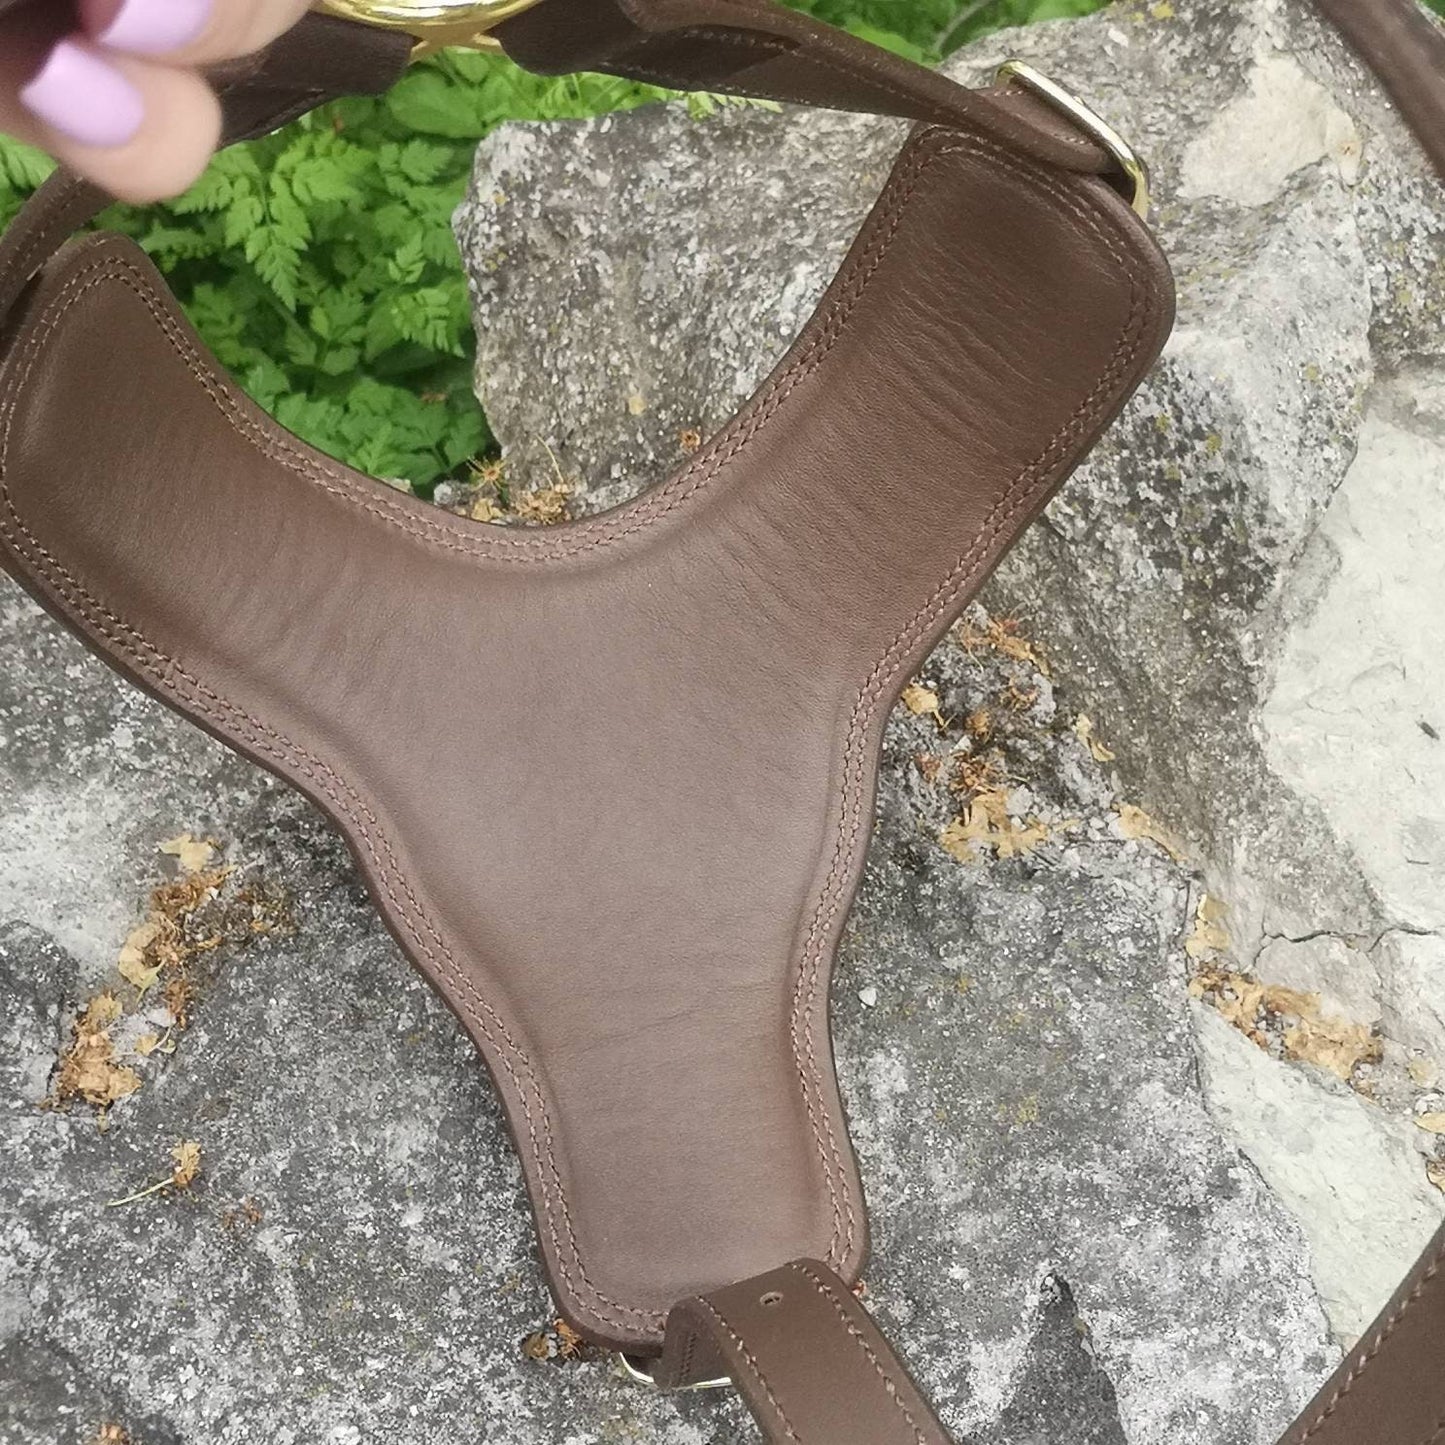 Handmade Leather Dog Harness with Handle, Brass Hardware Dog Harness, Padded Dog Harness, Brown Leather Dog Harness, Custom Dog Harness